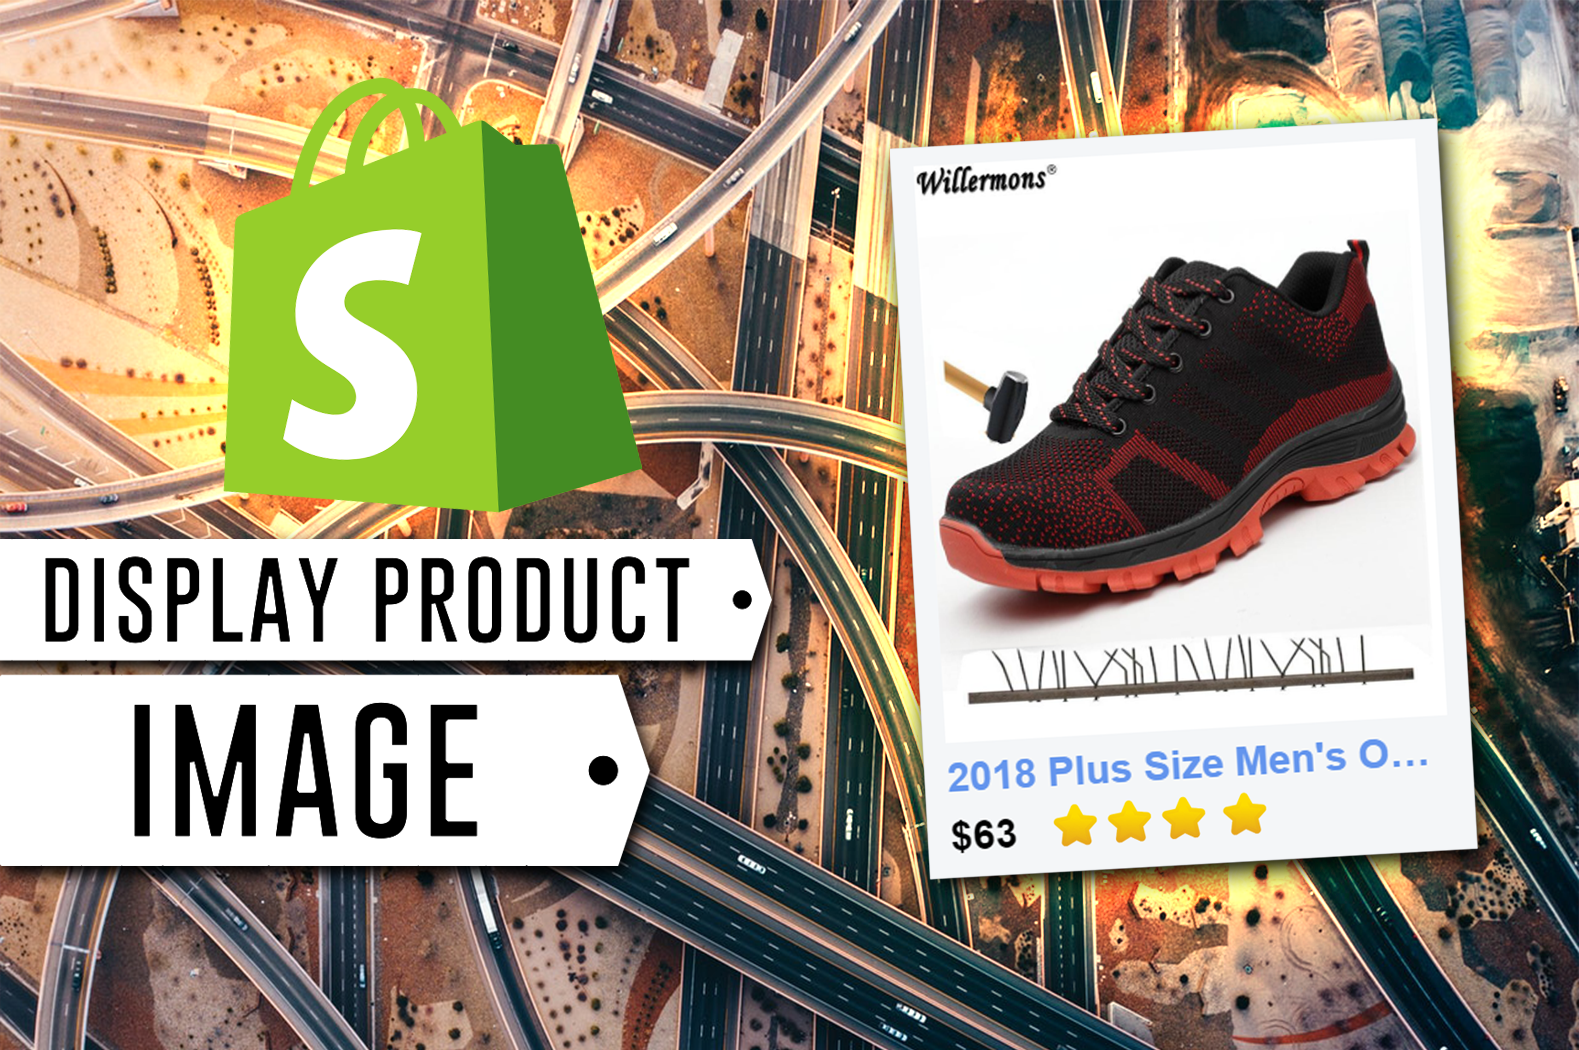 How to Display Shopify Product Images and Price and Name - Shopify App Development Tutorial PHP